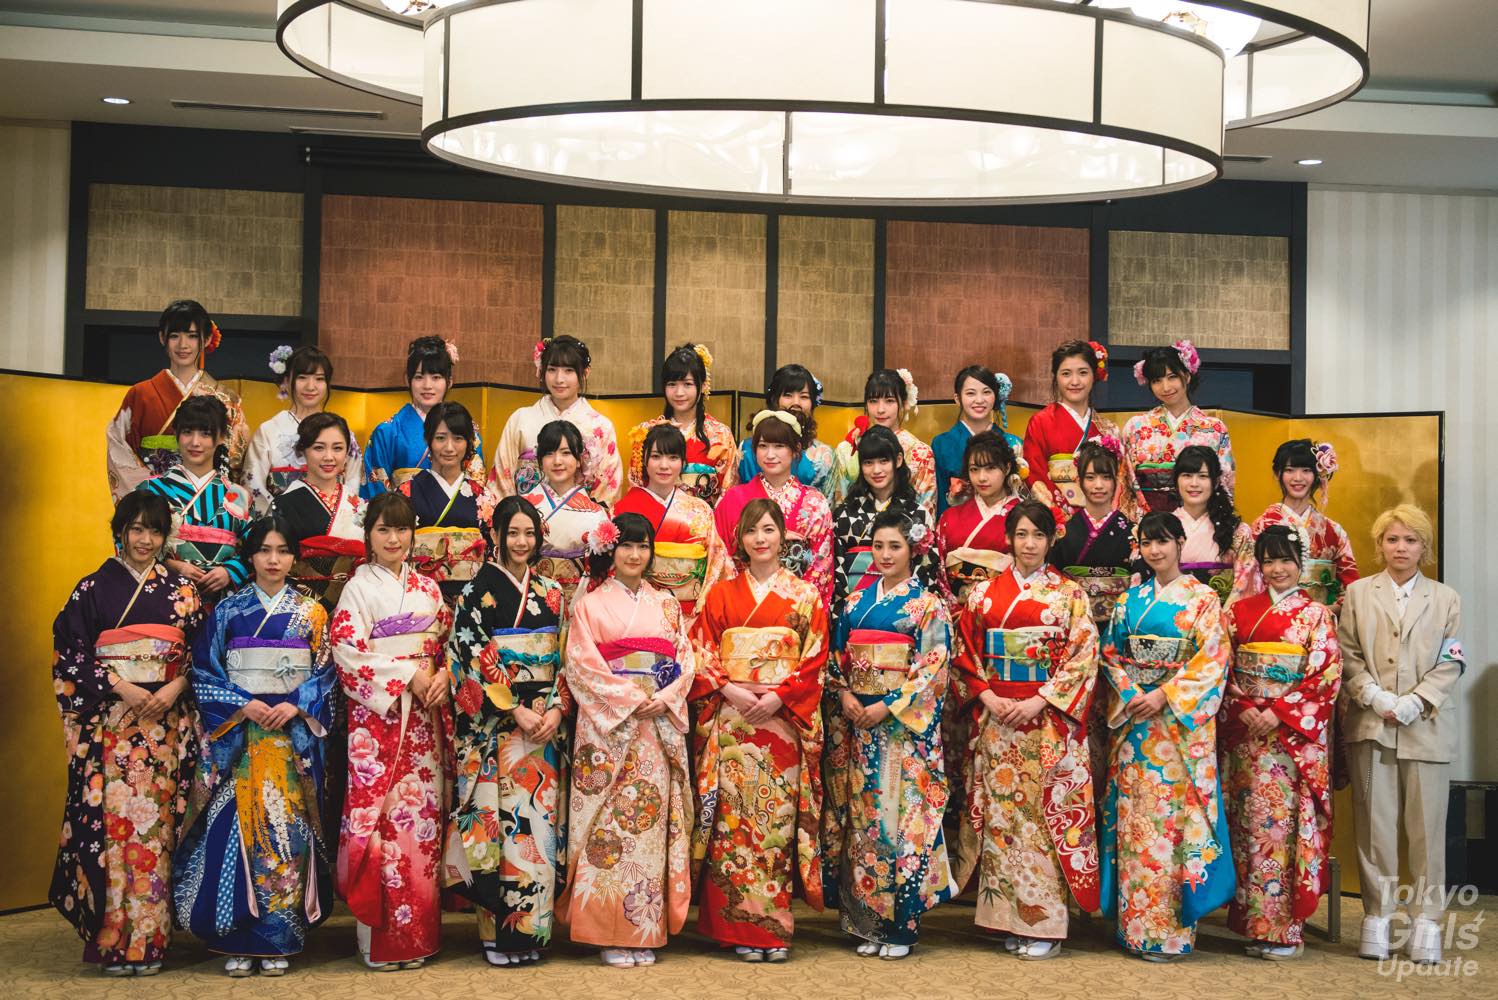 Exclusive Photo Report: AKB48 Group Coming of Age Ceremony 2017 at Kanda Myojin!